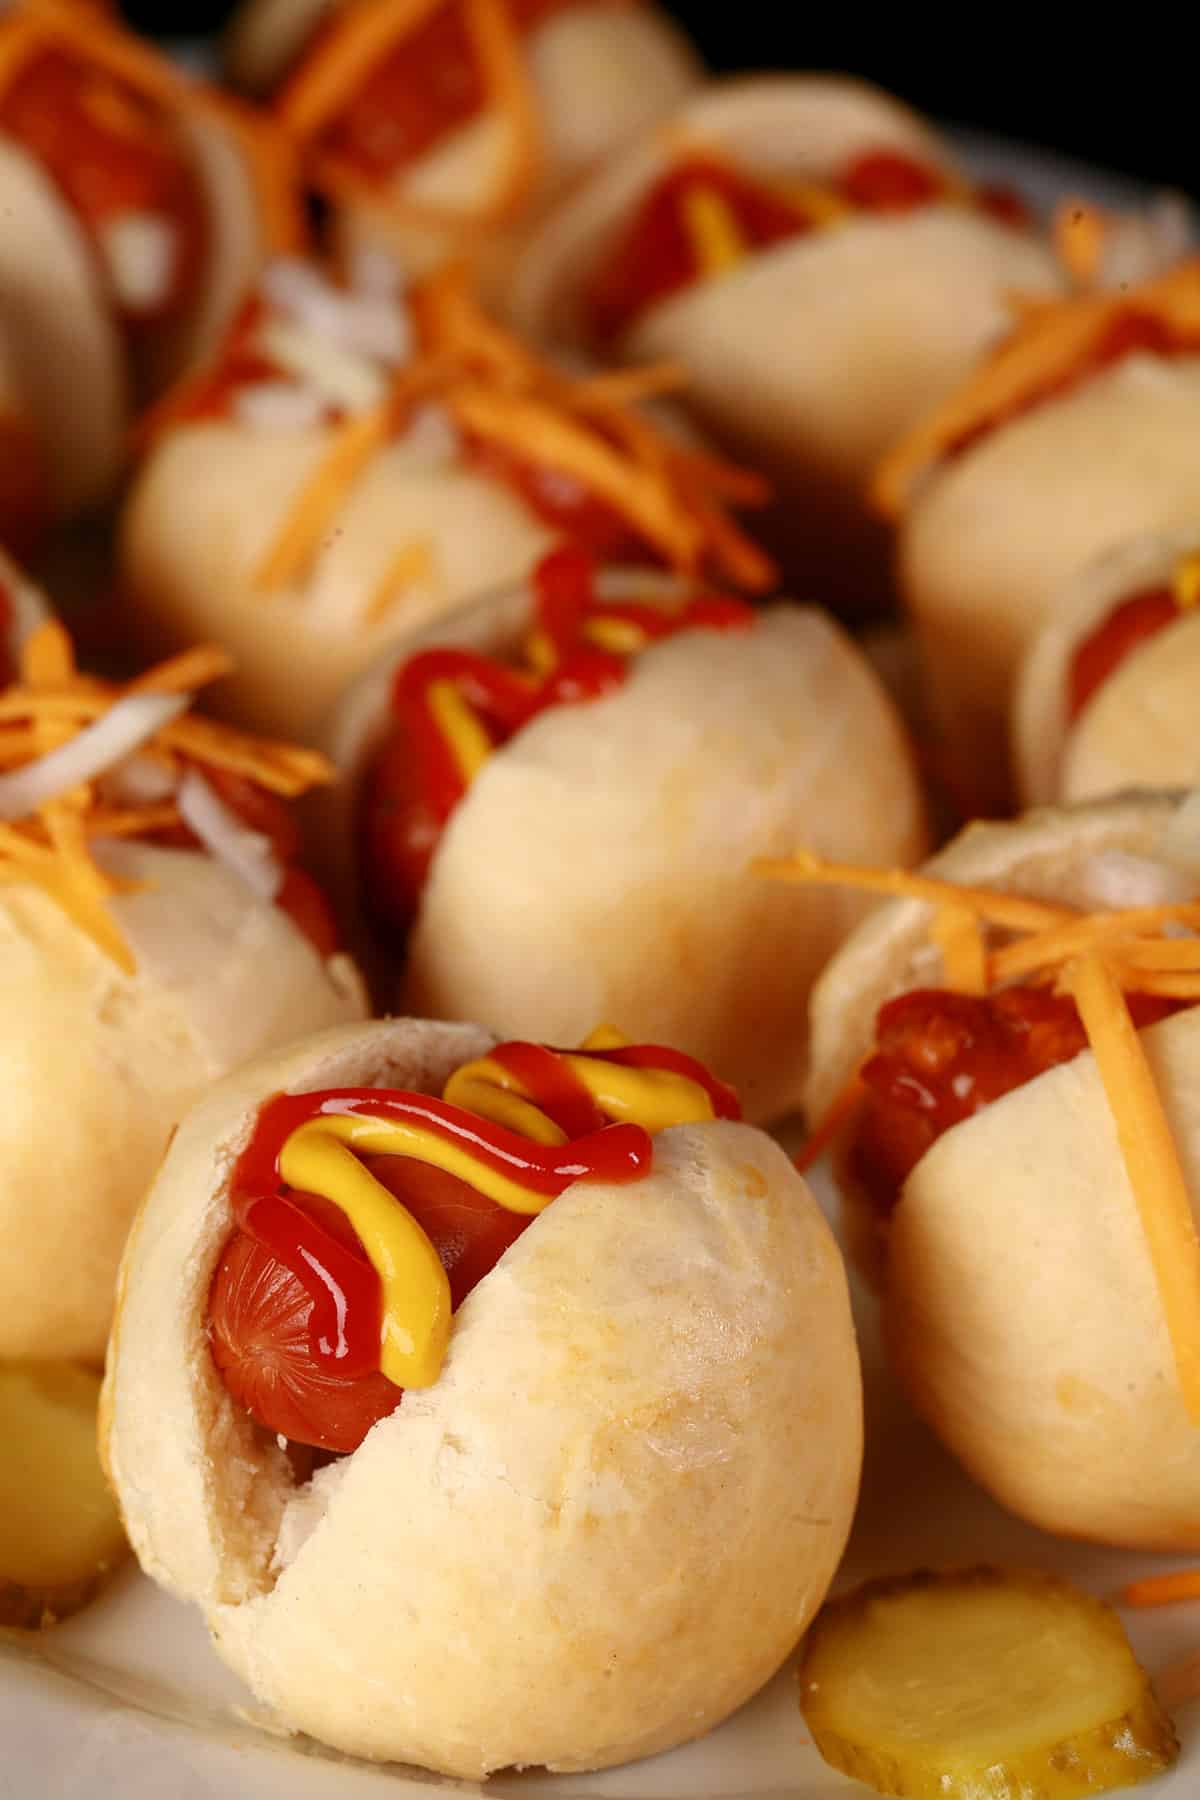 A plate of hot dog sliders, with cheese, hot dog, ketchup, and chili toppings.